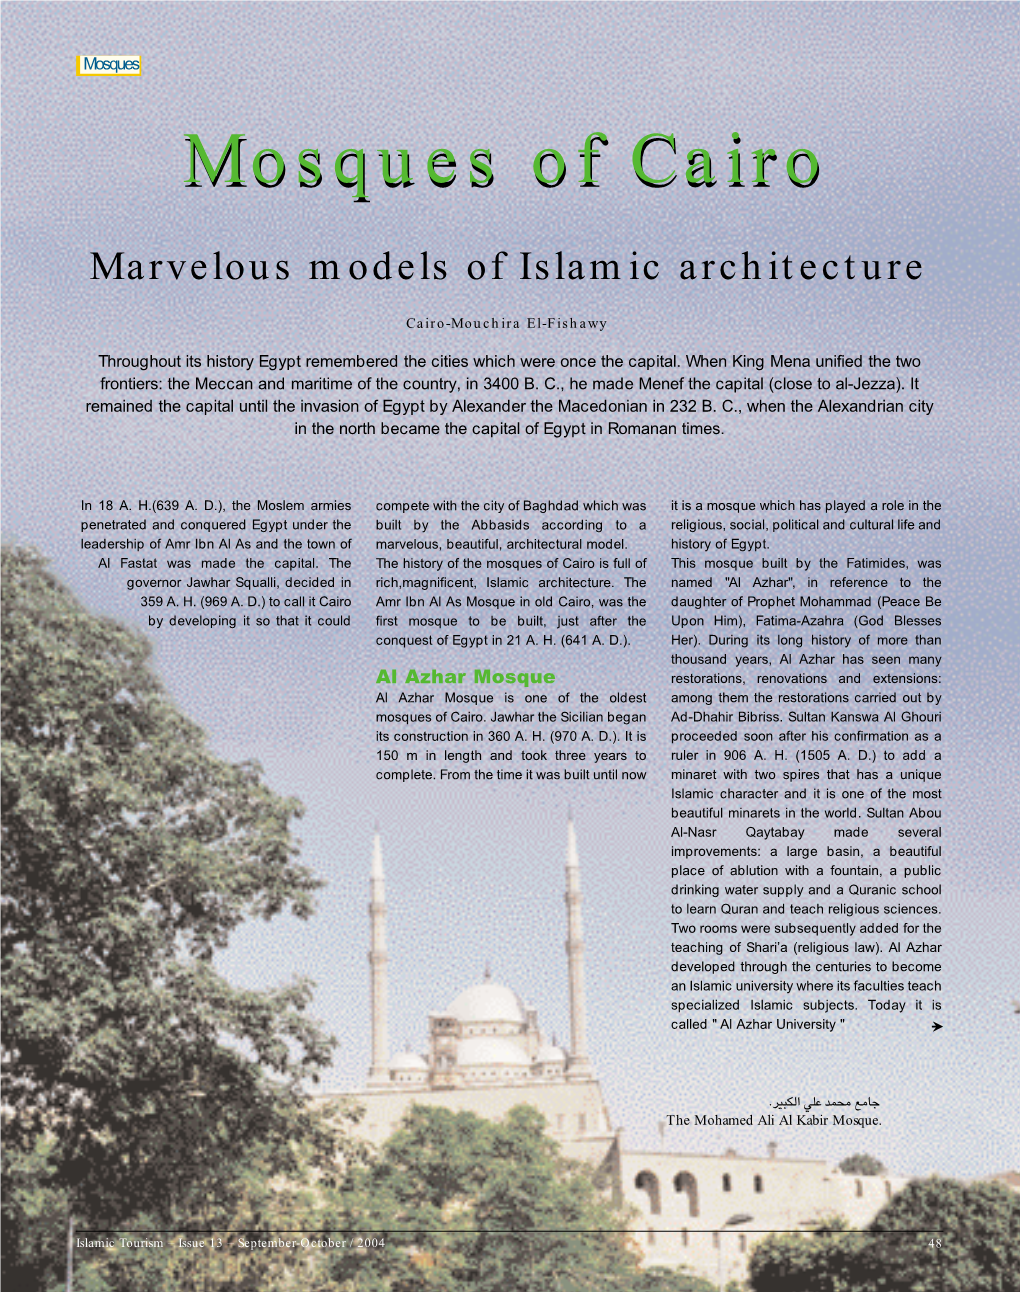 Mosques of Cairo